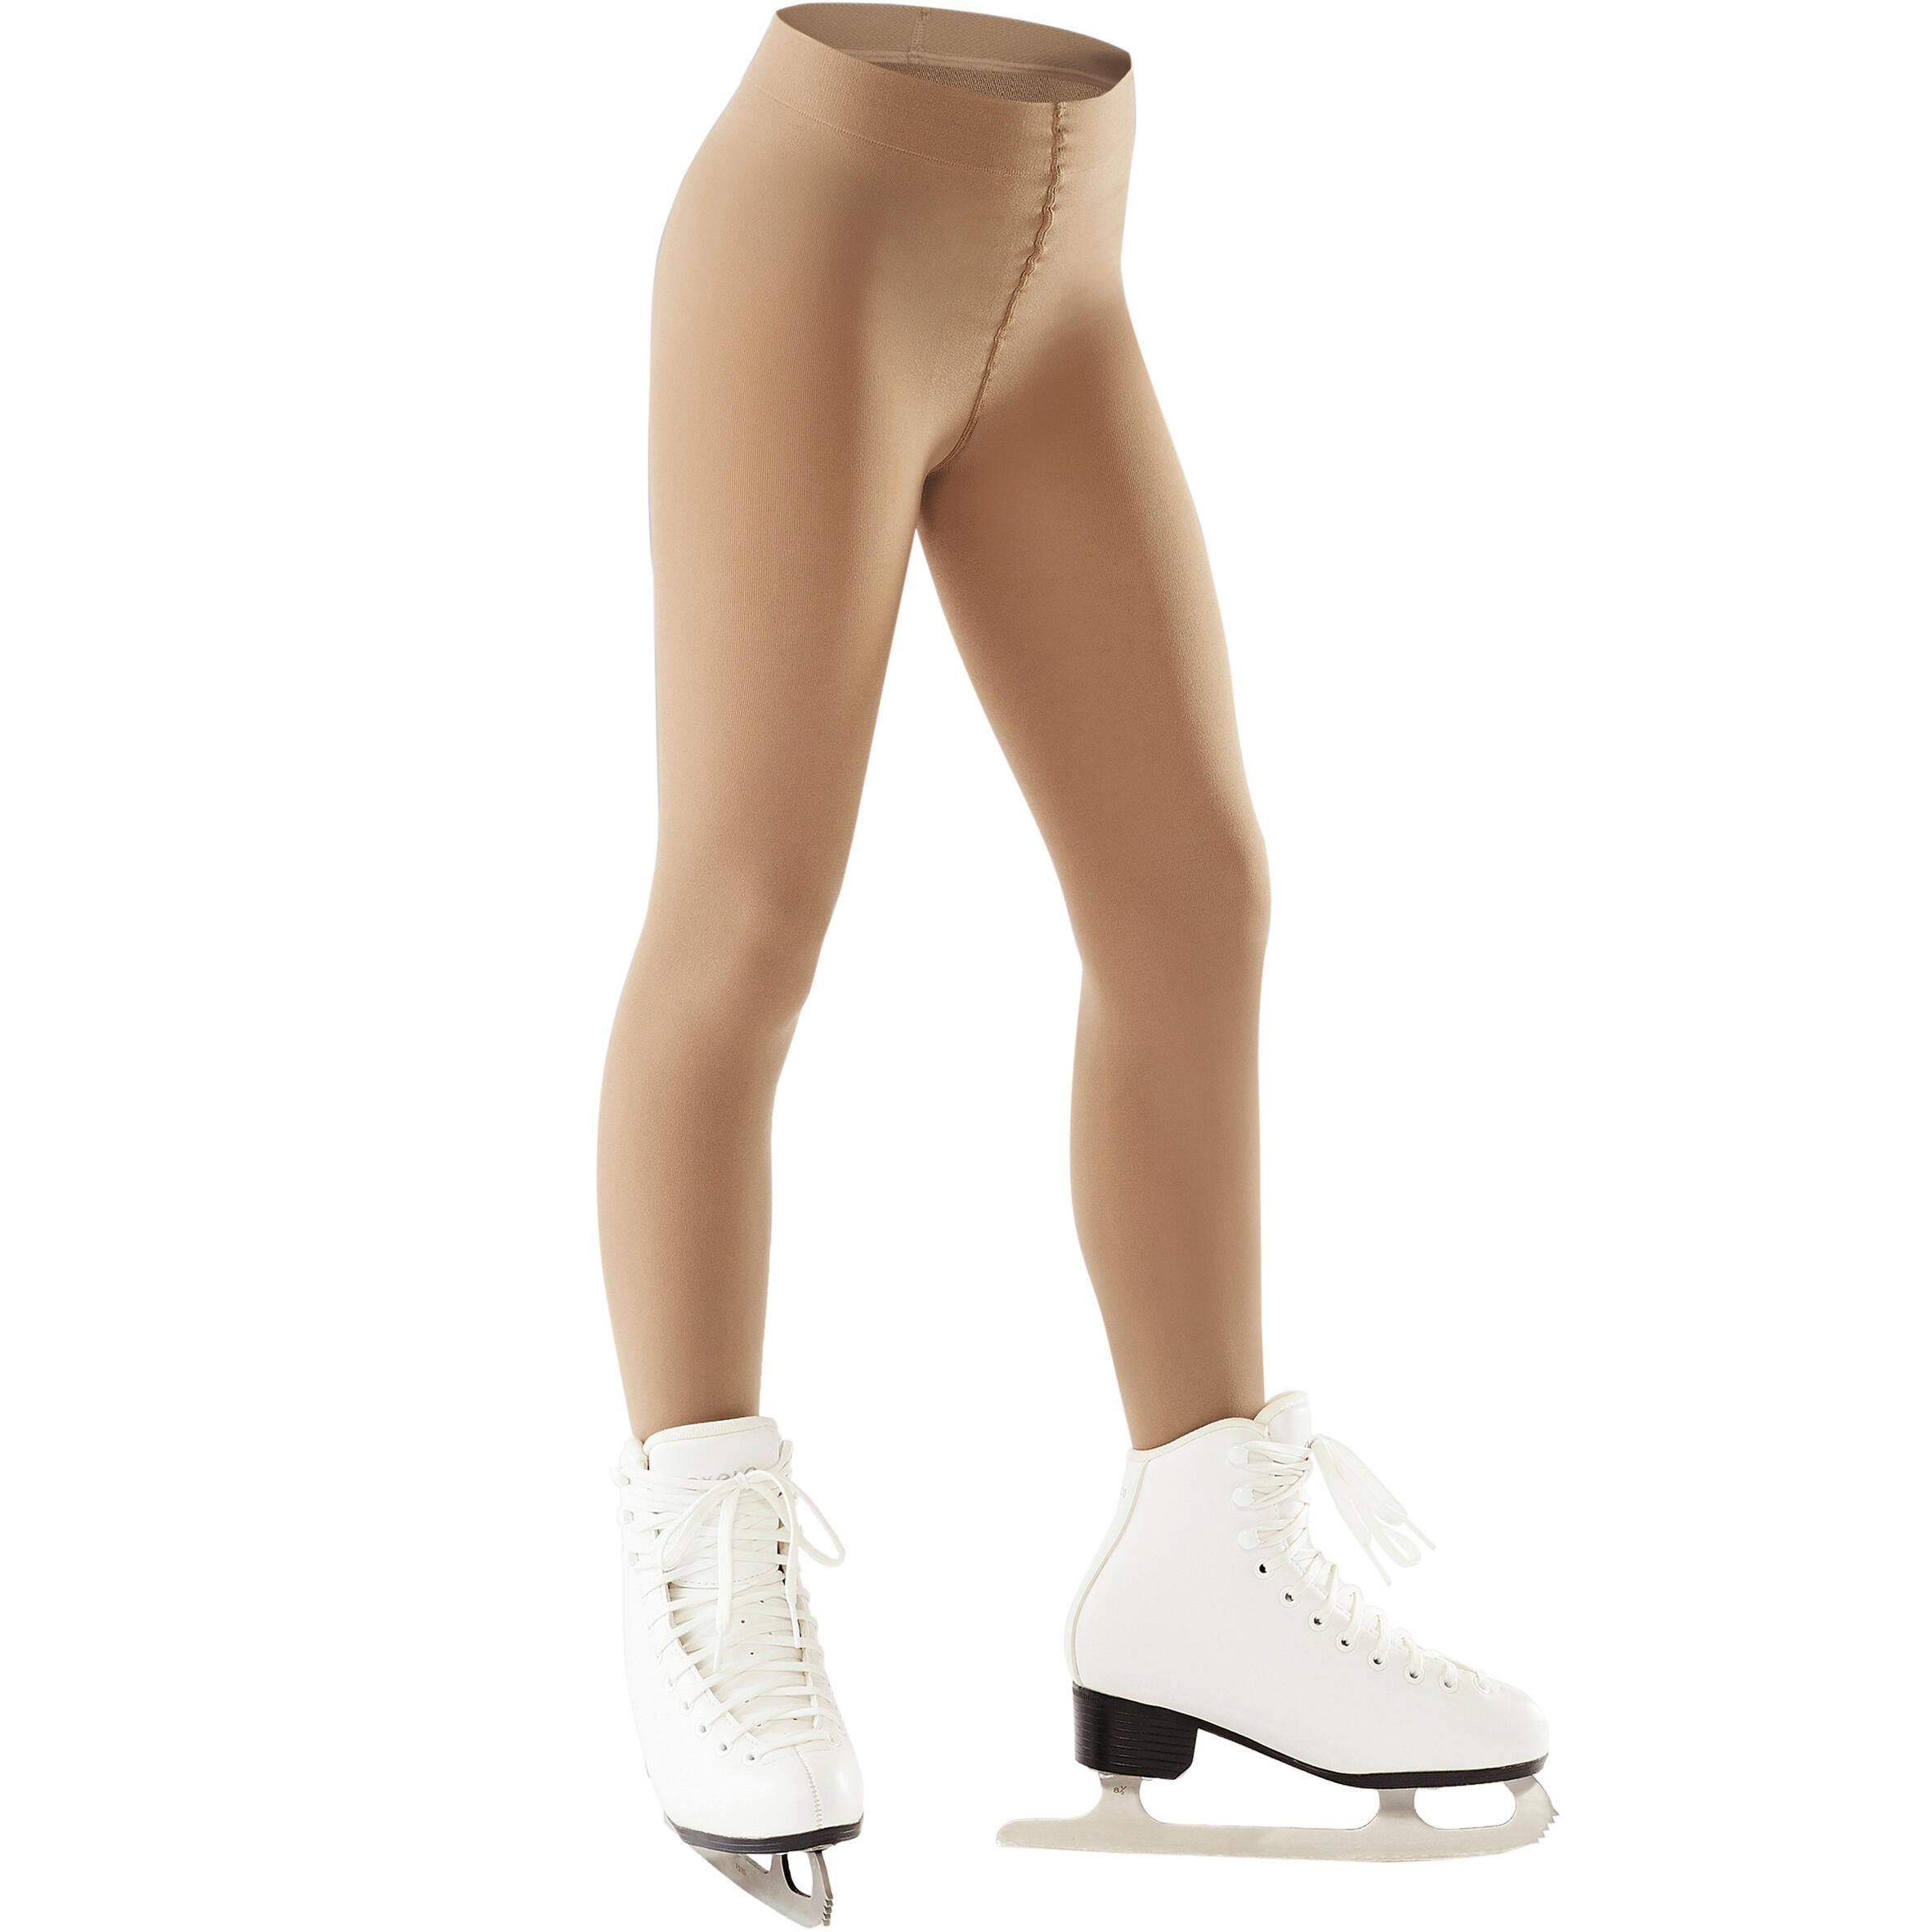 AXELYS Kids' Footed Figure Skating Tights